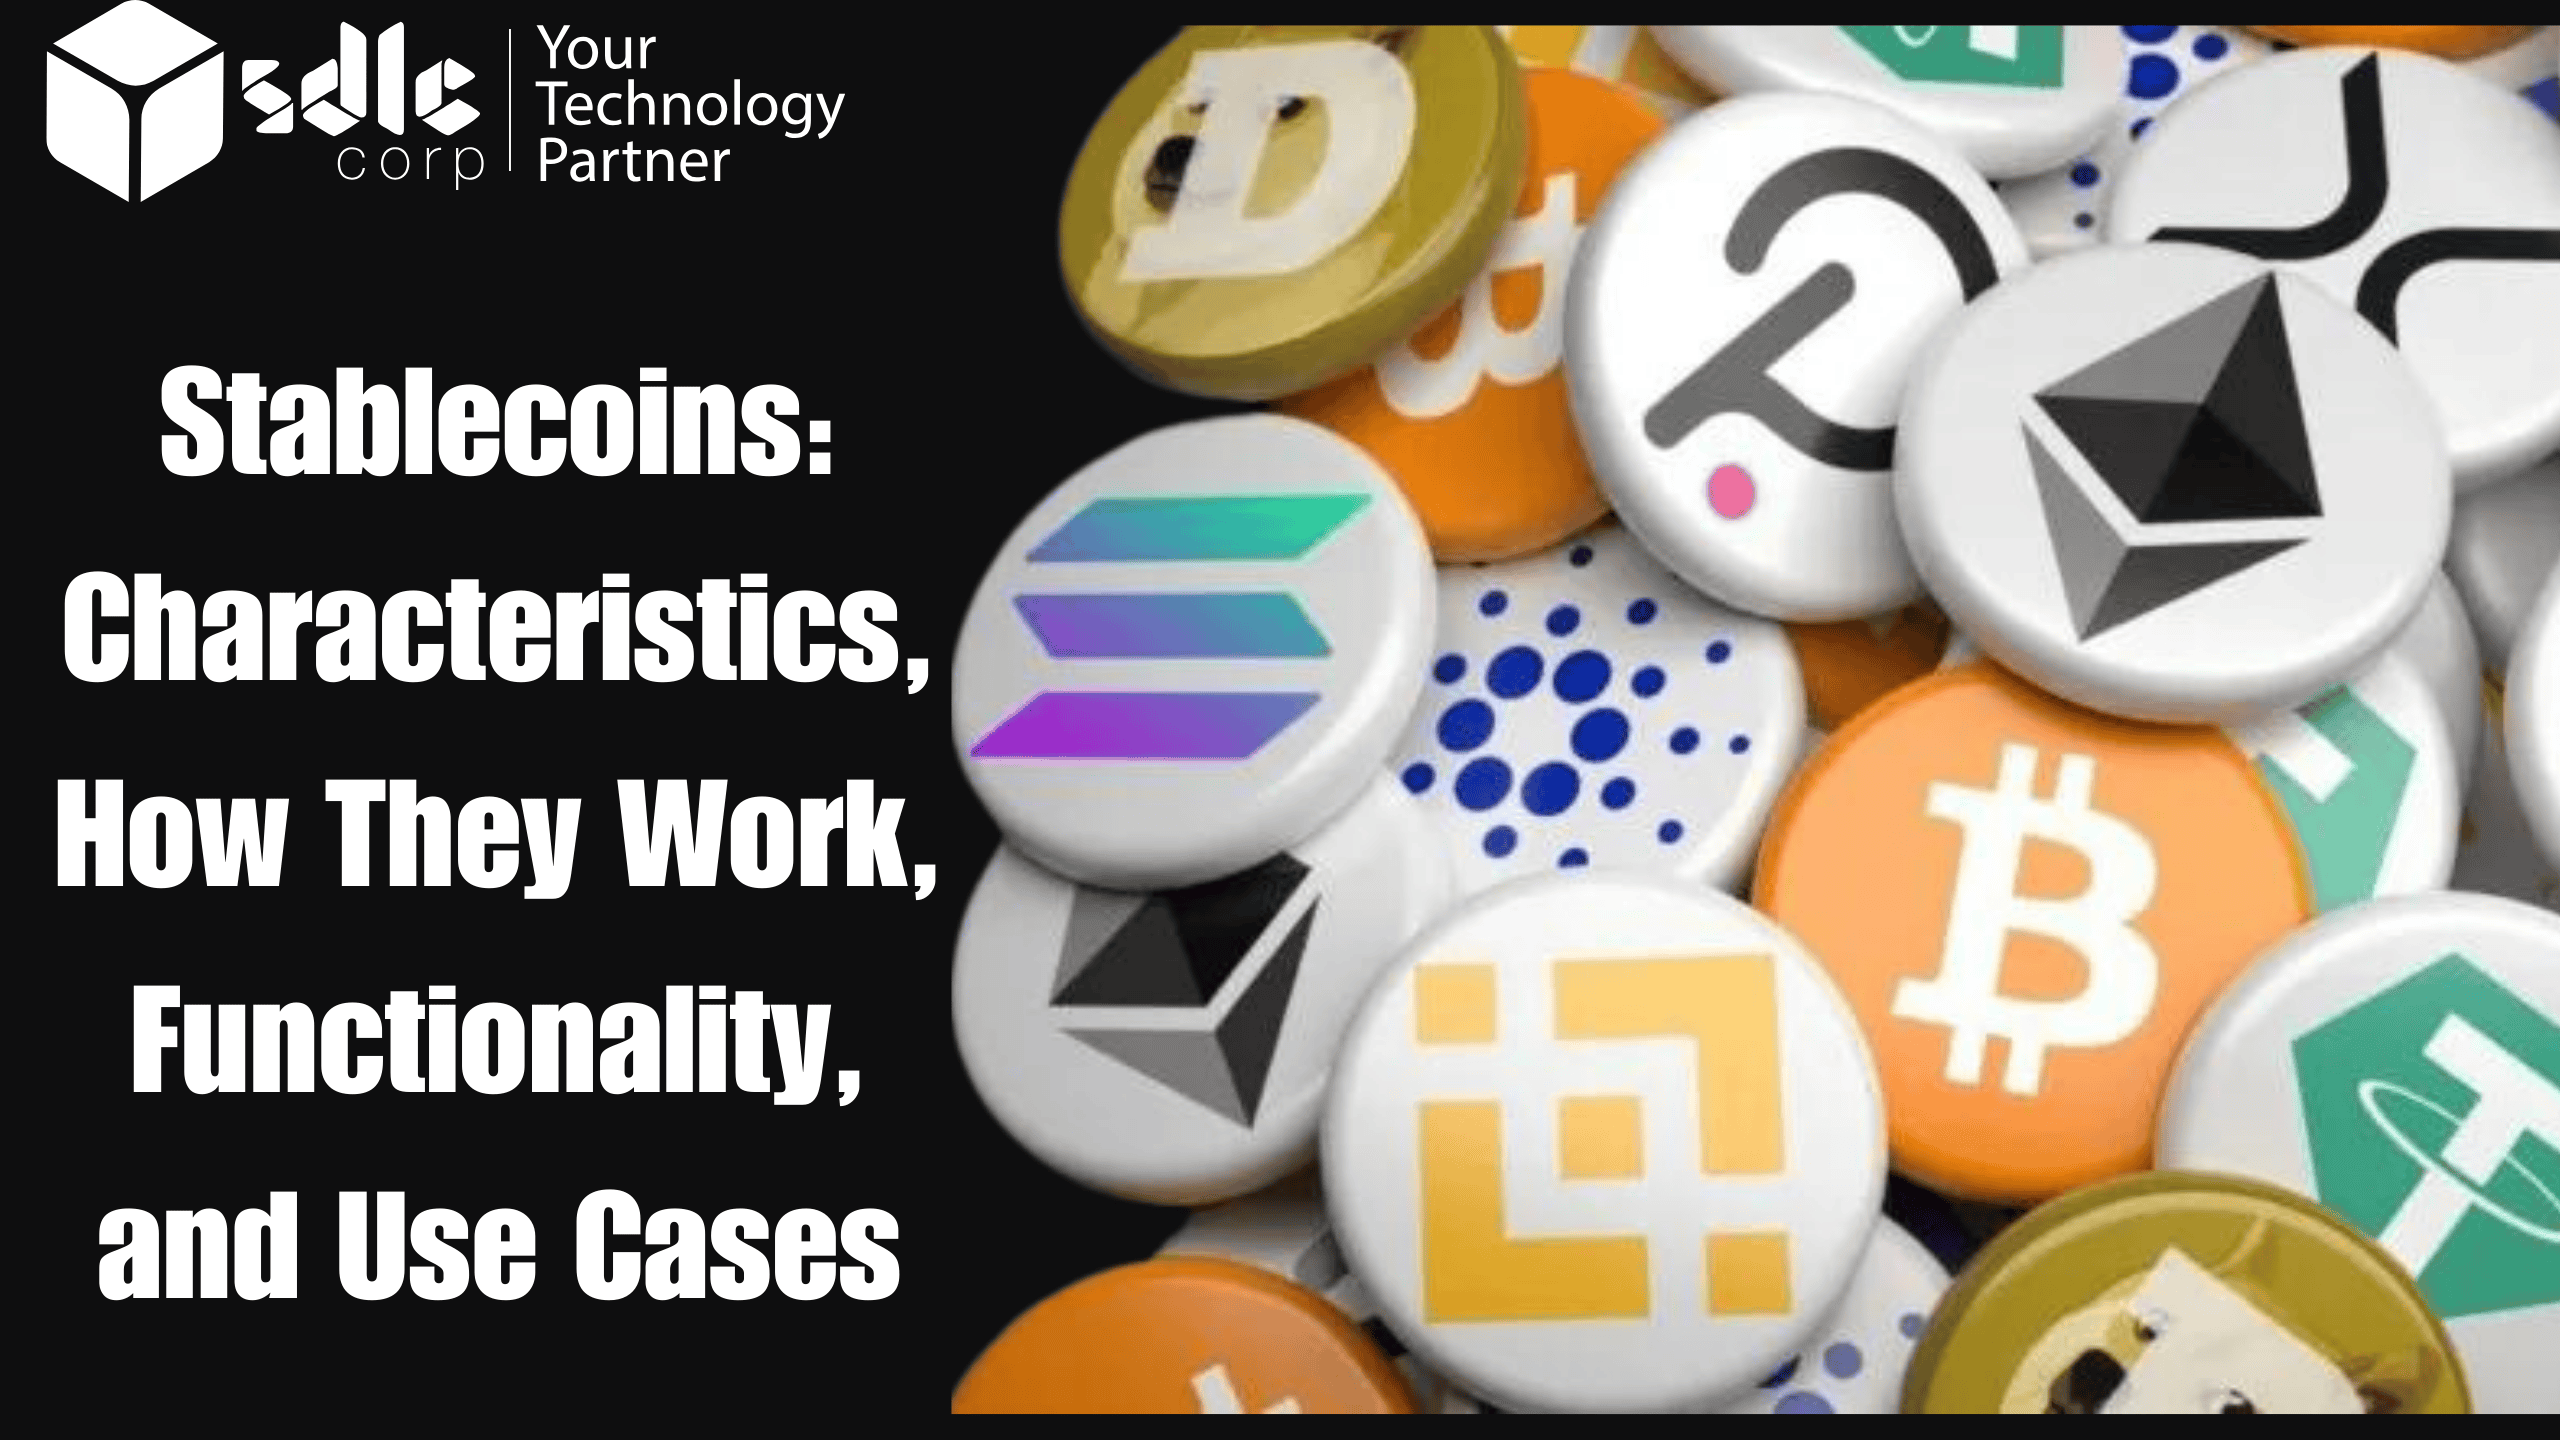 Stablecoins Characteristics, How They Work, Functionality, and Use Cases